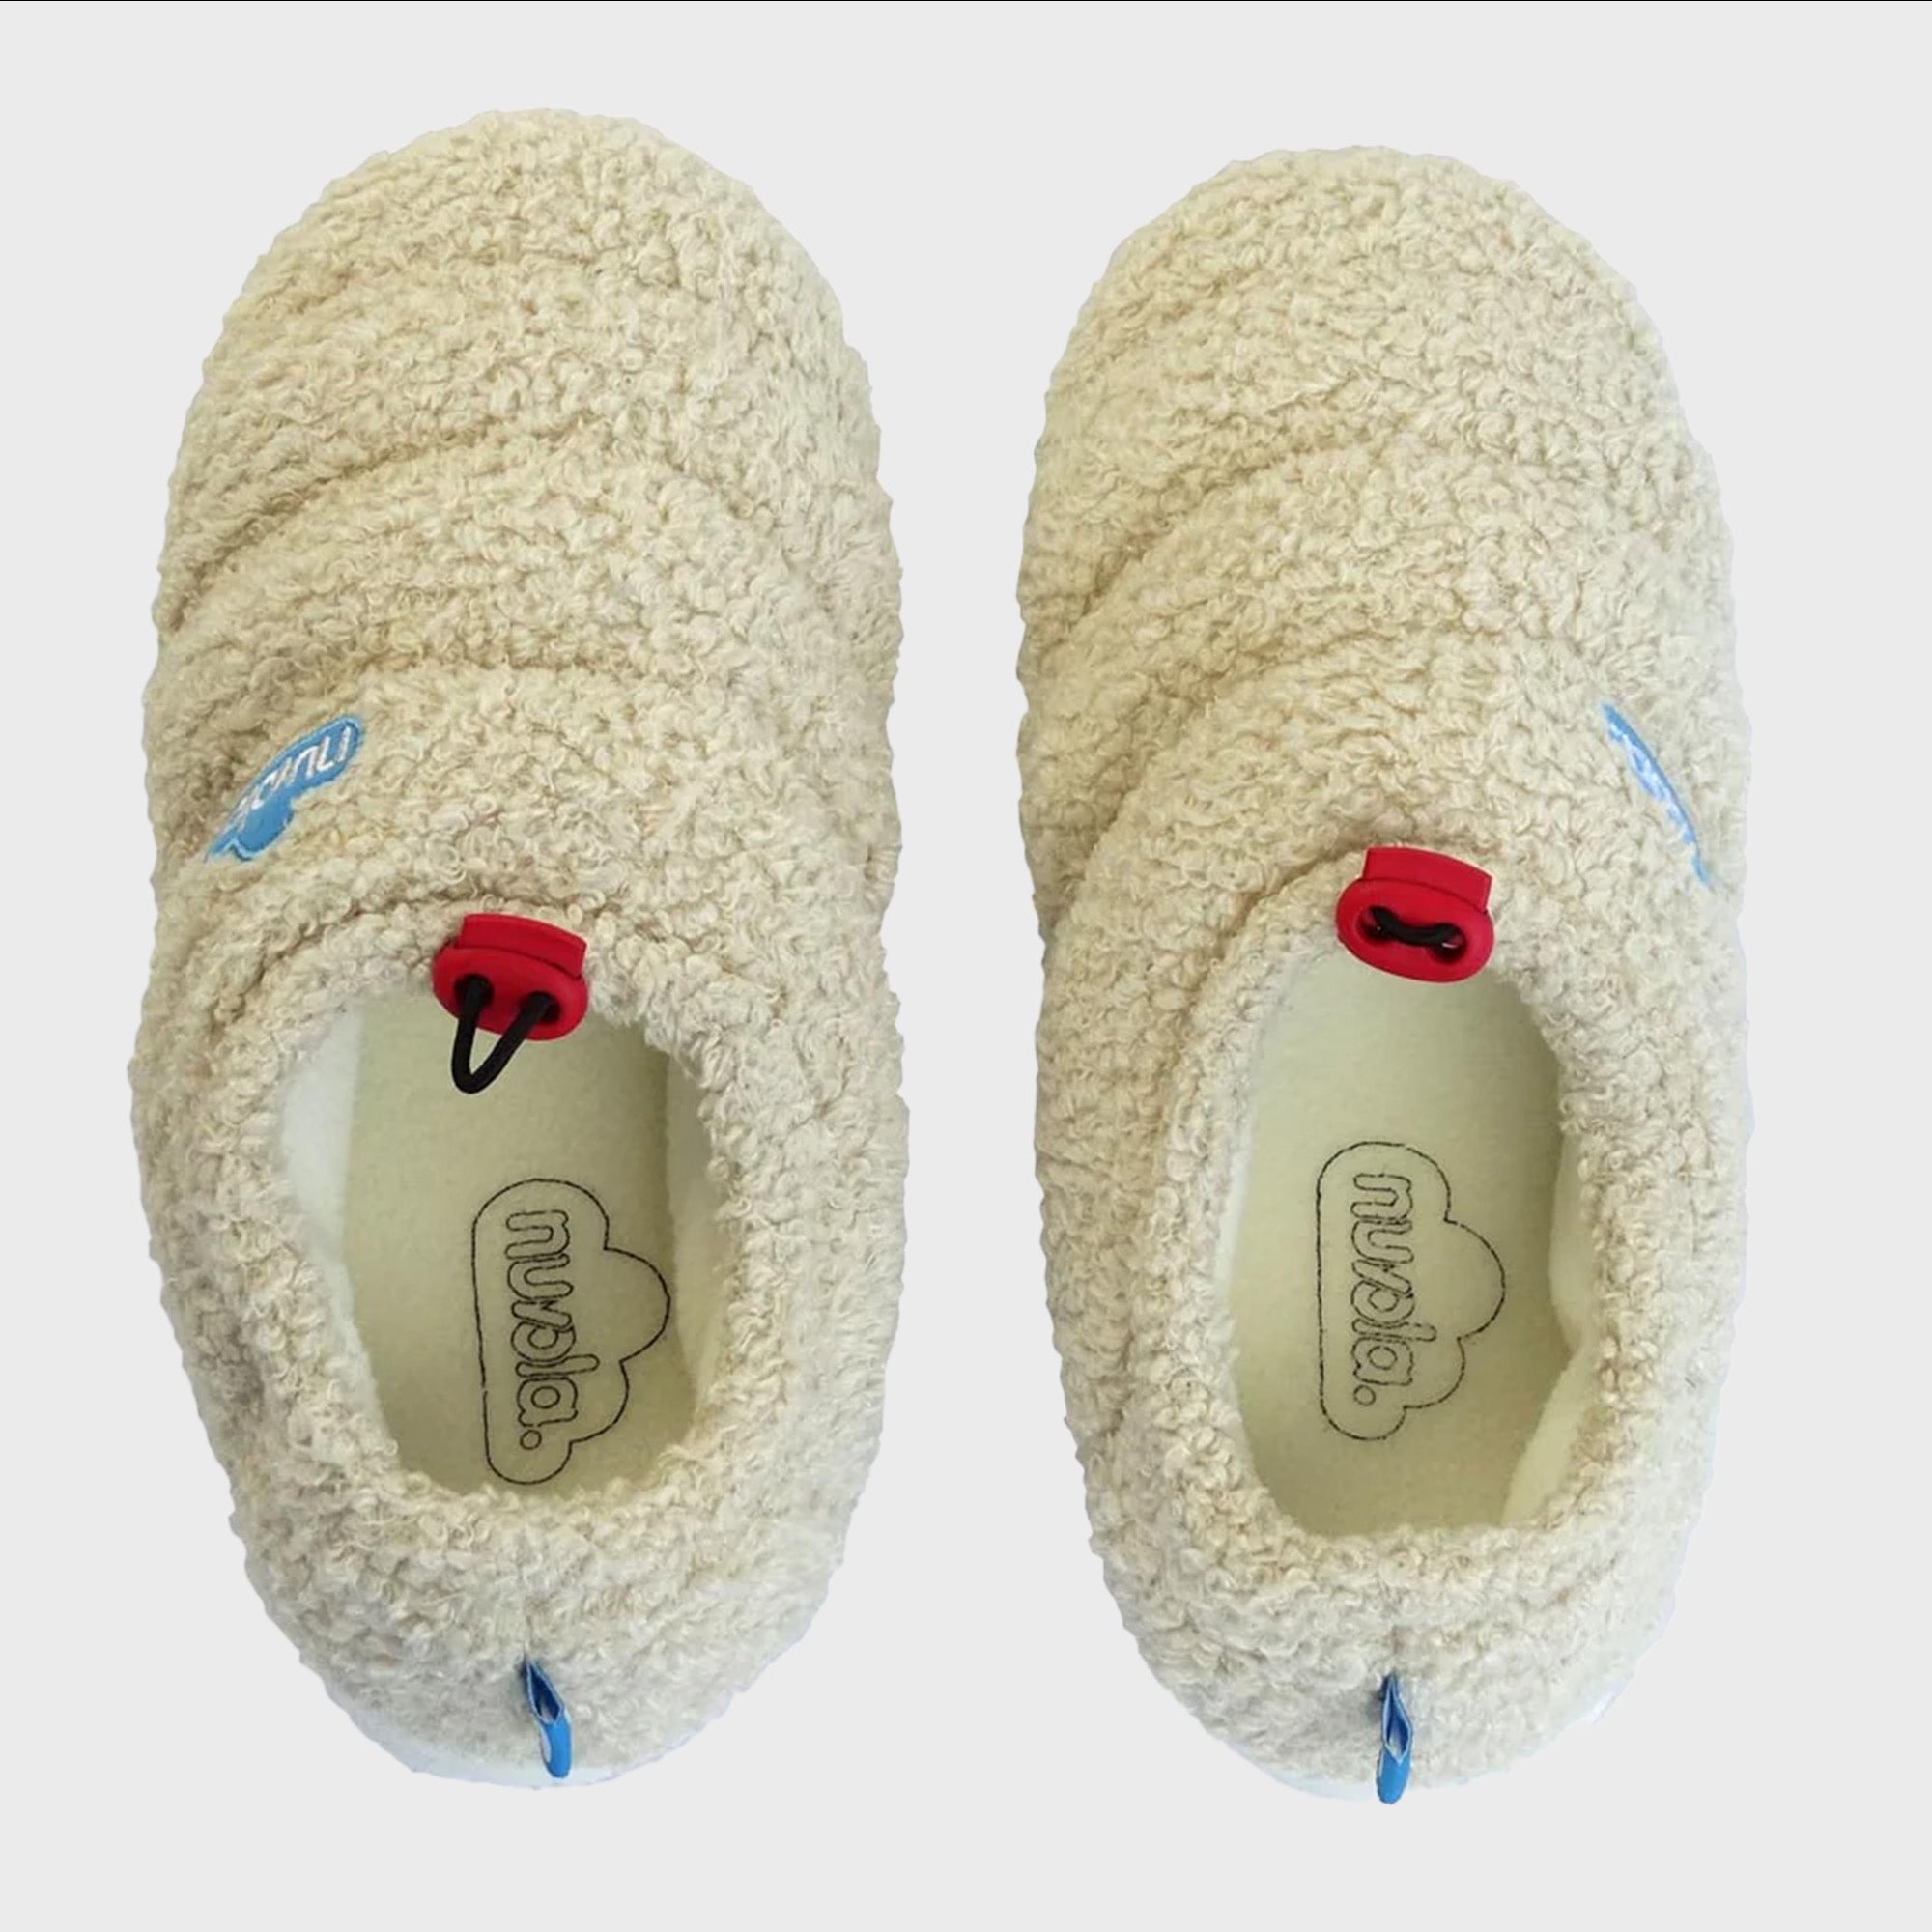 Nuvola Classic Sheep Slippers in Cream CNCLSHEP697 FROM EIGHTYWINGOLD - OFFICIAL BRAND PARTNER